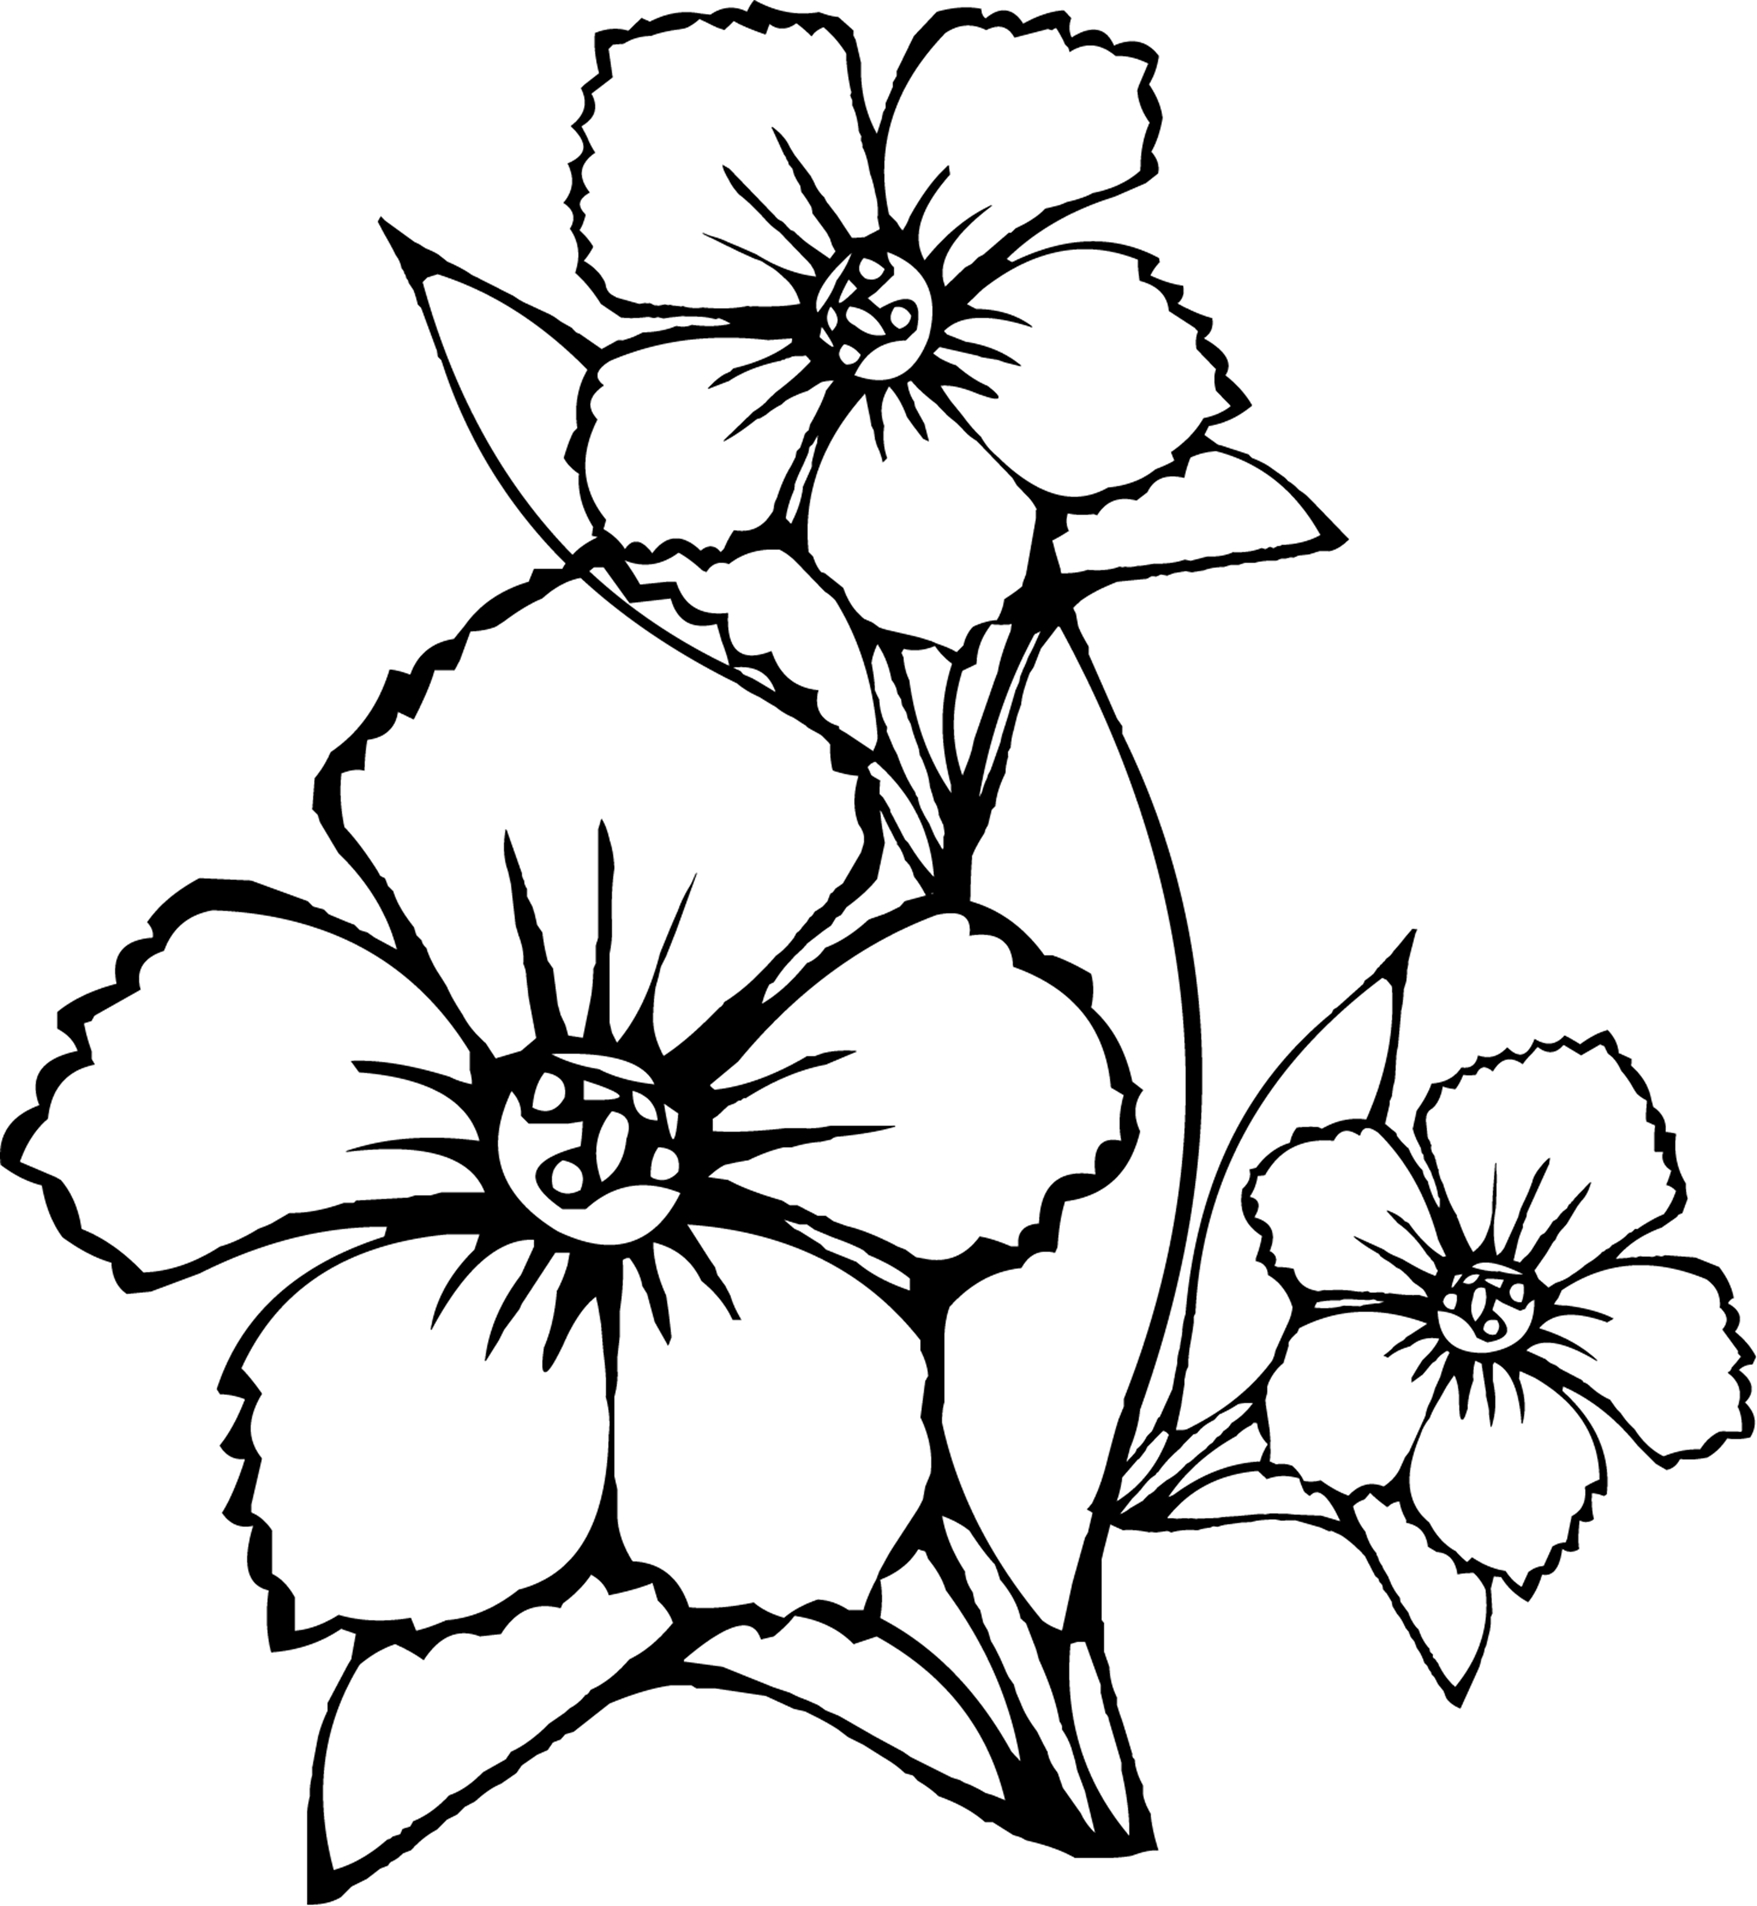 Cartoon Bouquet Coloring Page for Adult